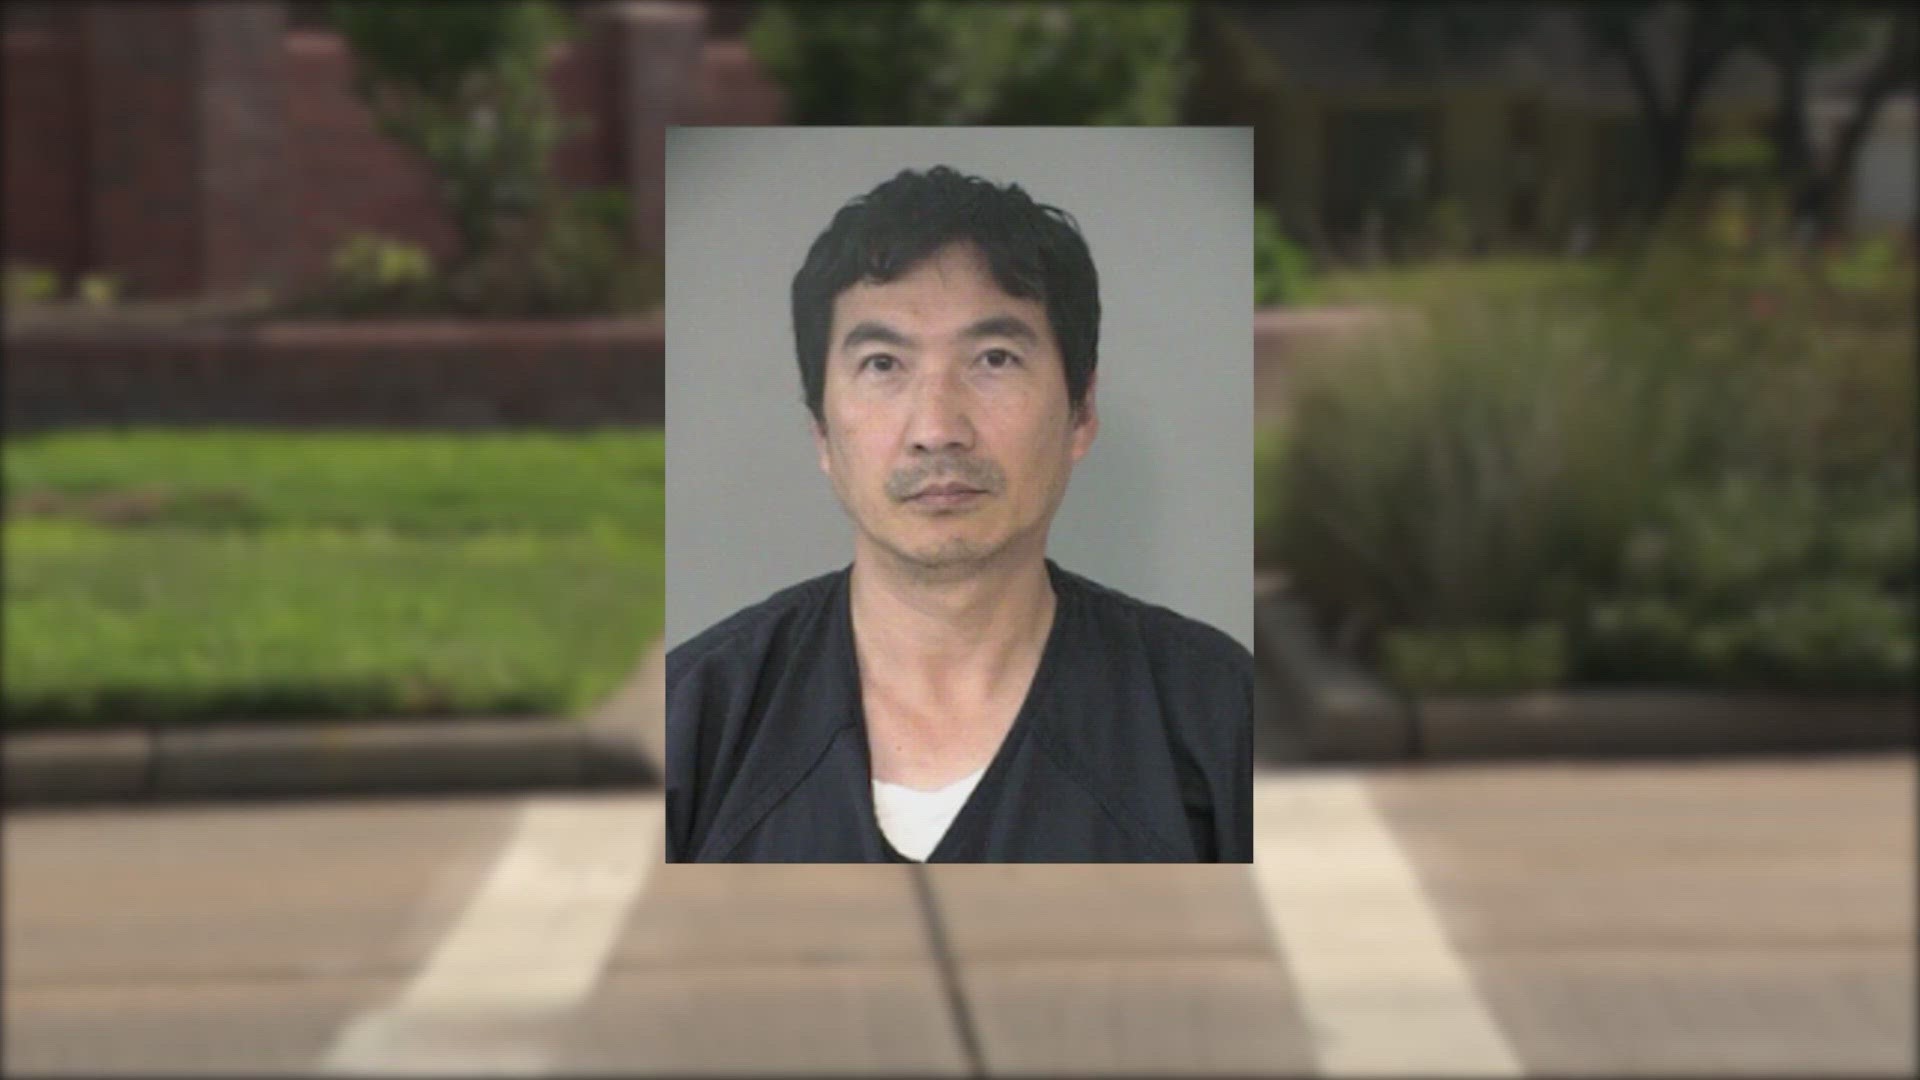 The Fort Bend County District Attorney's Office said Bao Giang's case is believed to be the first to be heard after the Lisa Torry Smith Act passed.